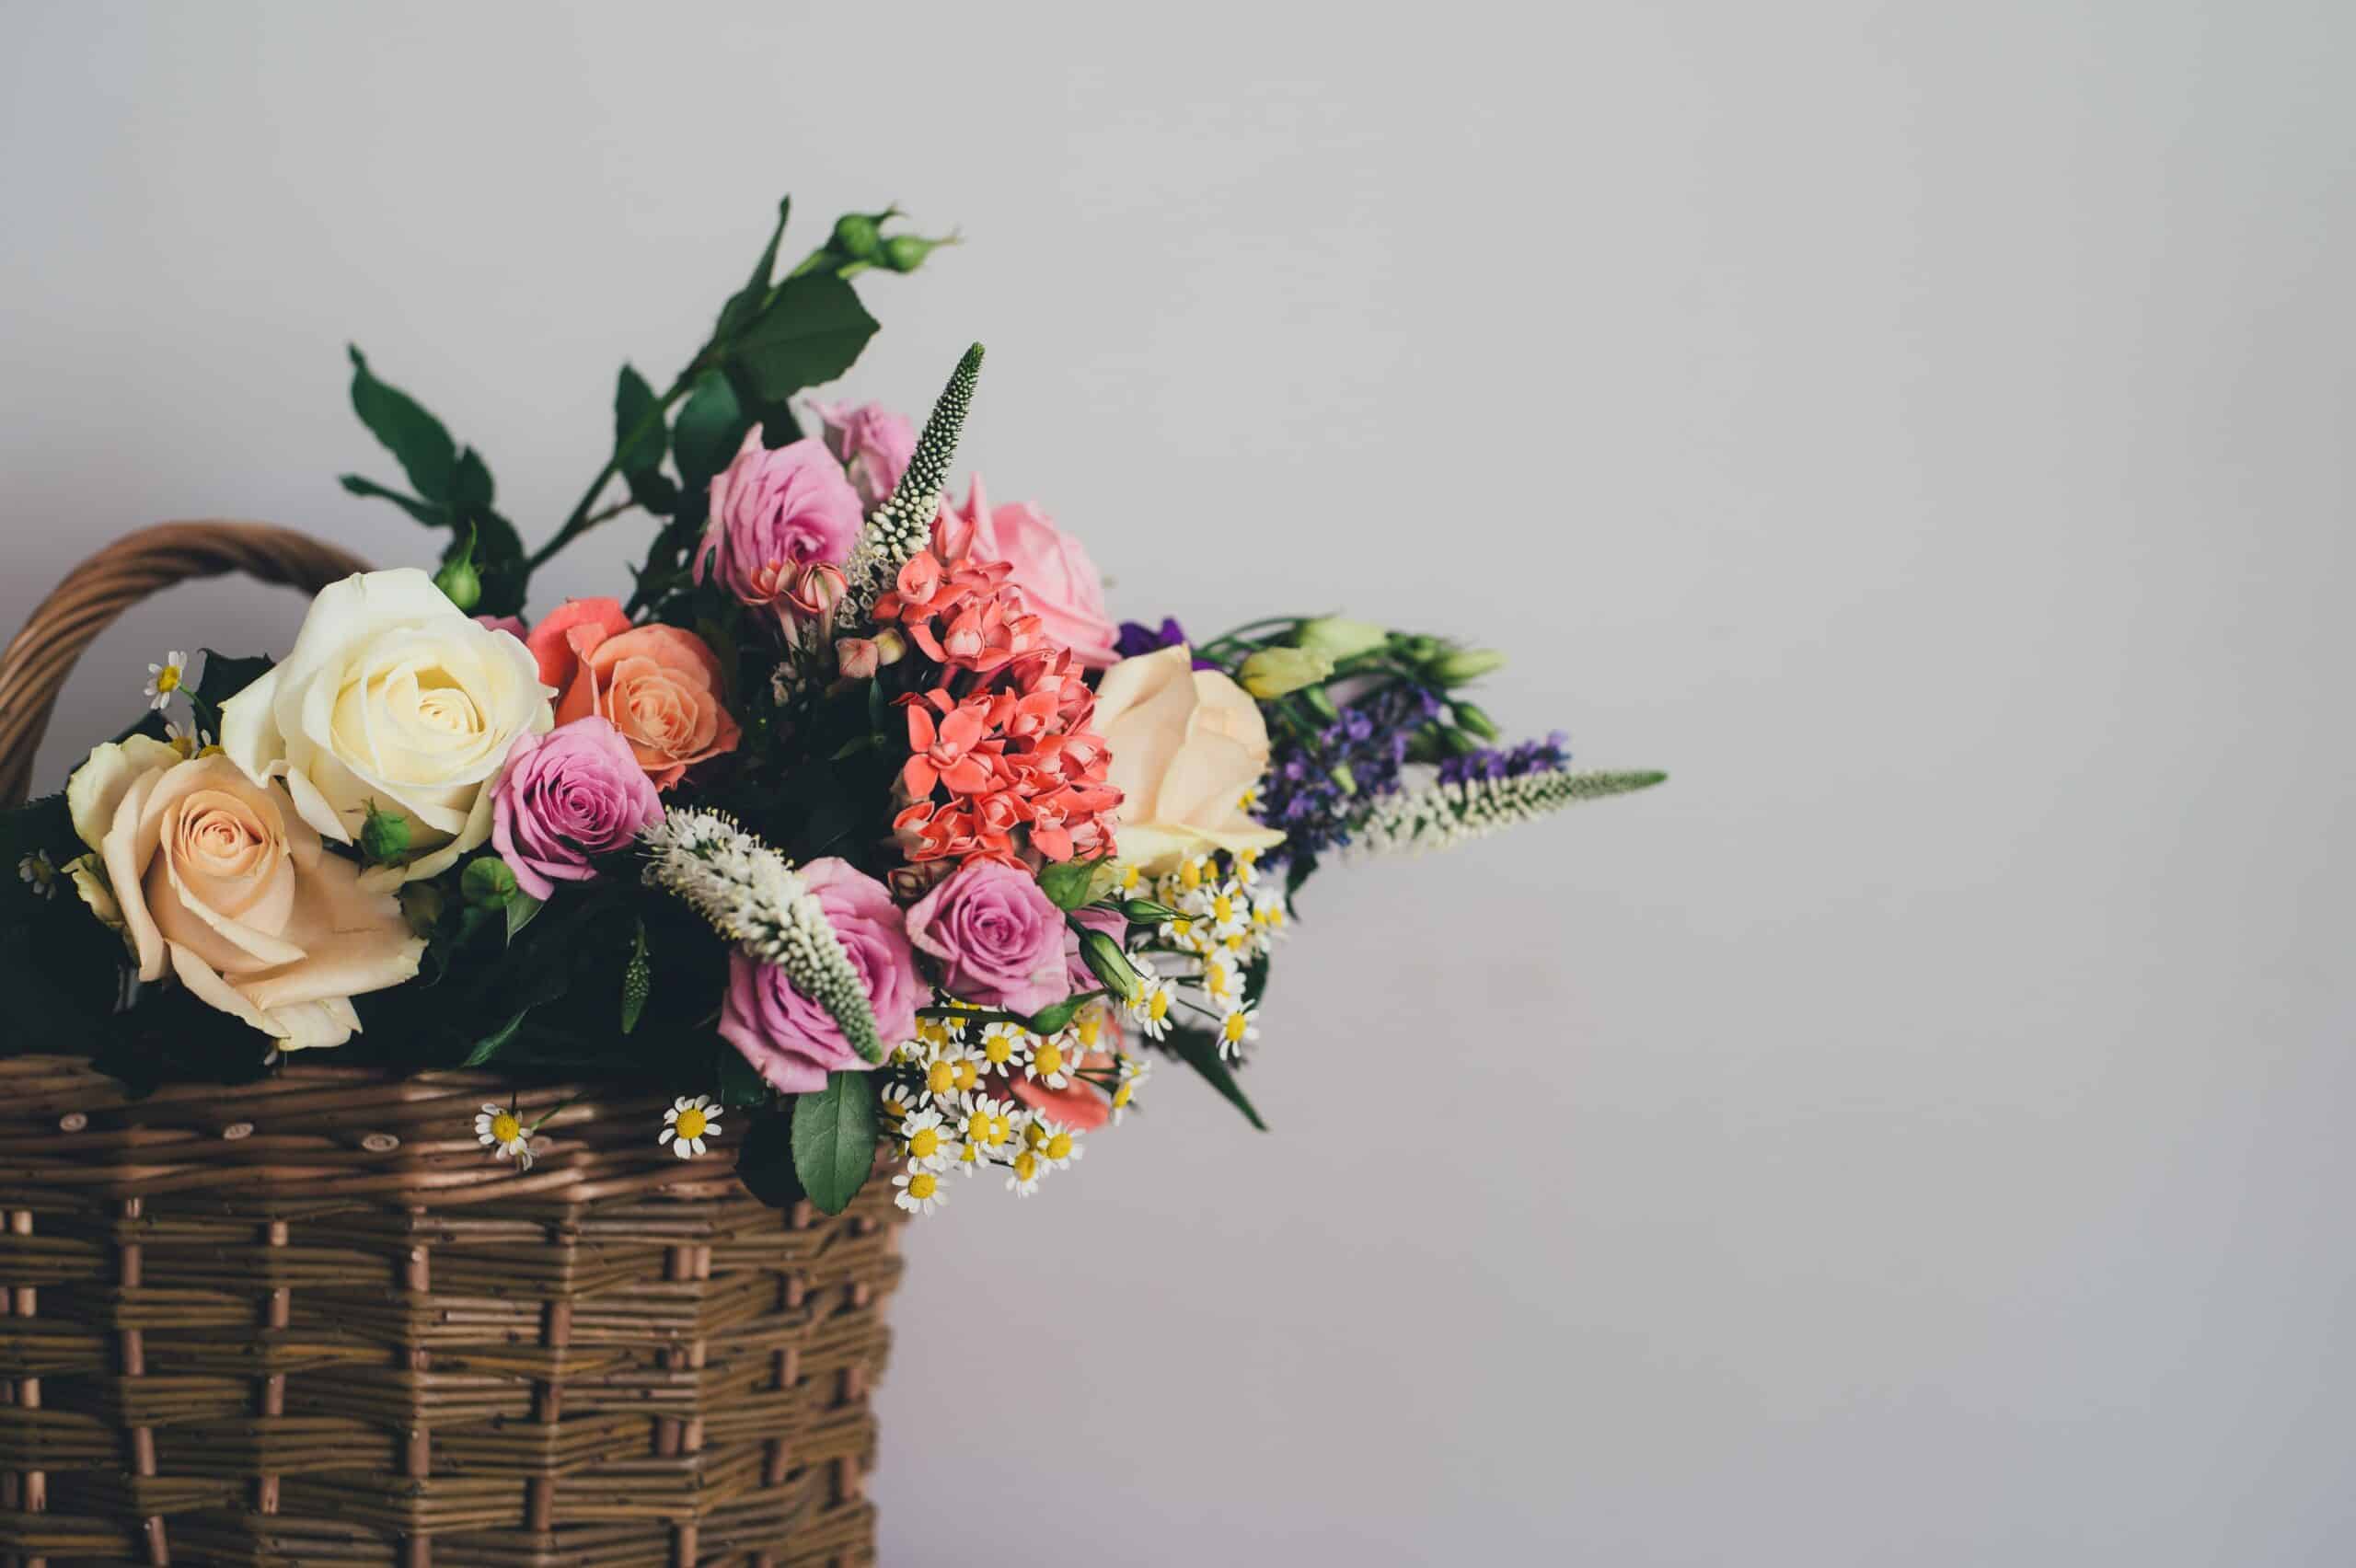 10 Tips for Keeping Your Fresh-Cut Flowers Fresh